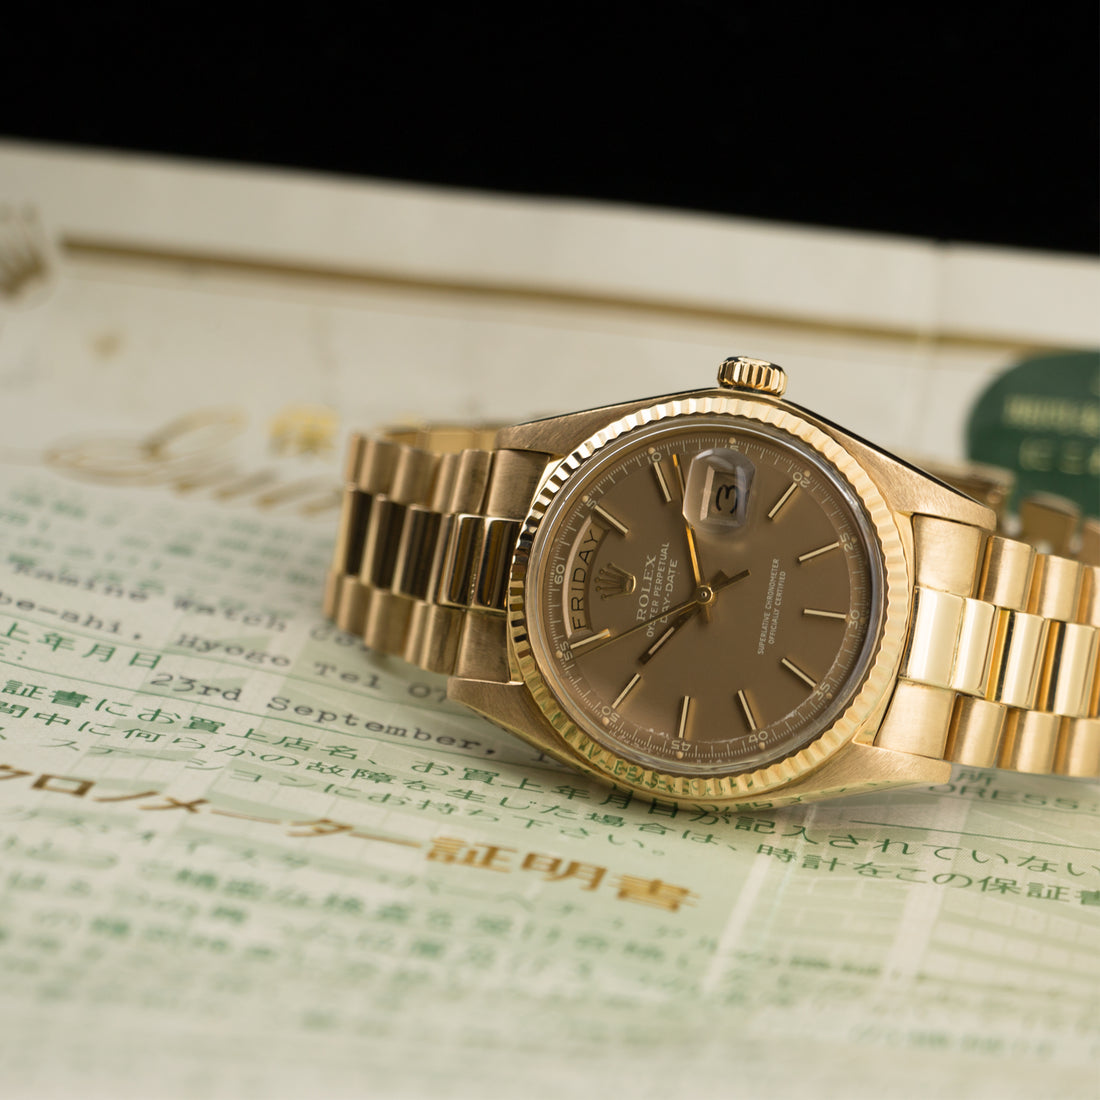 Rolex Yellow Gold Day-Date Watch Ref. 1803 with Original Papers